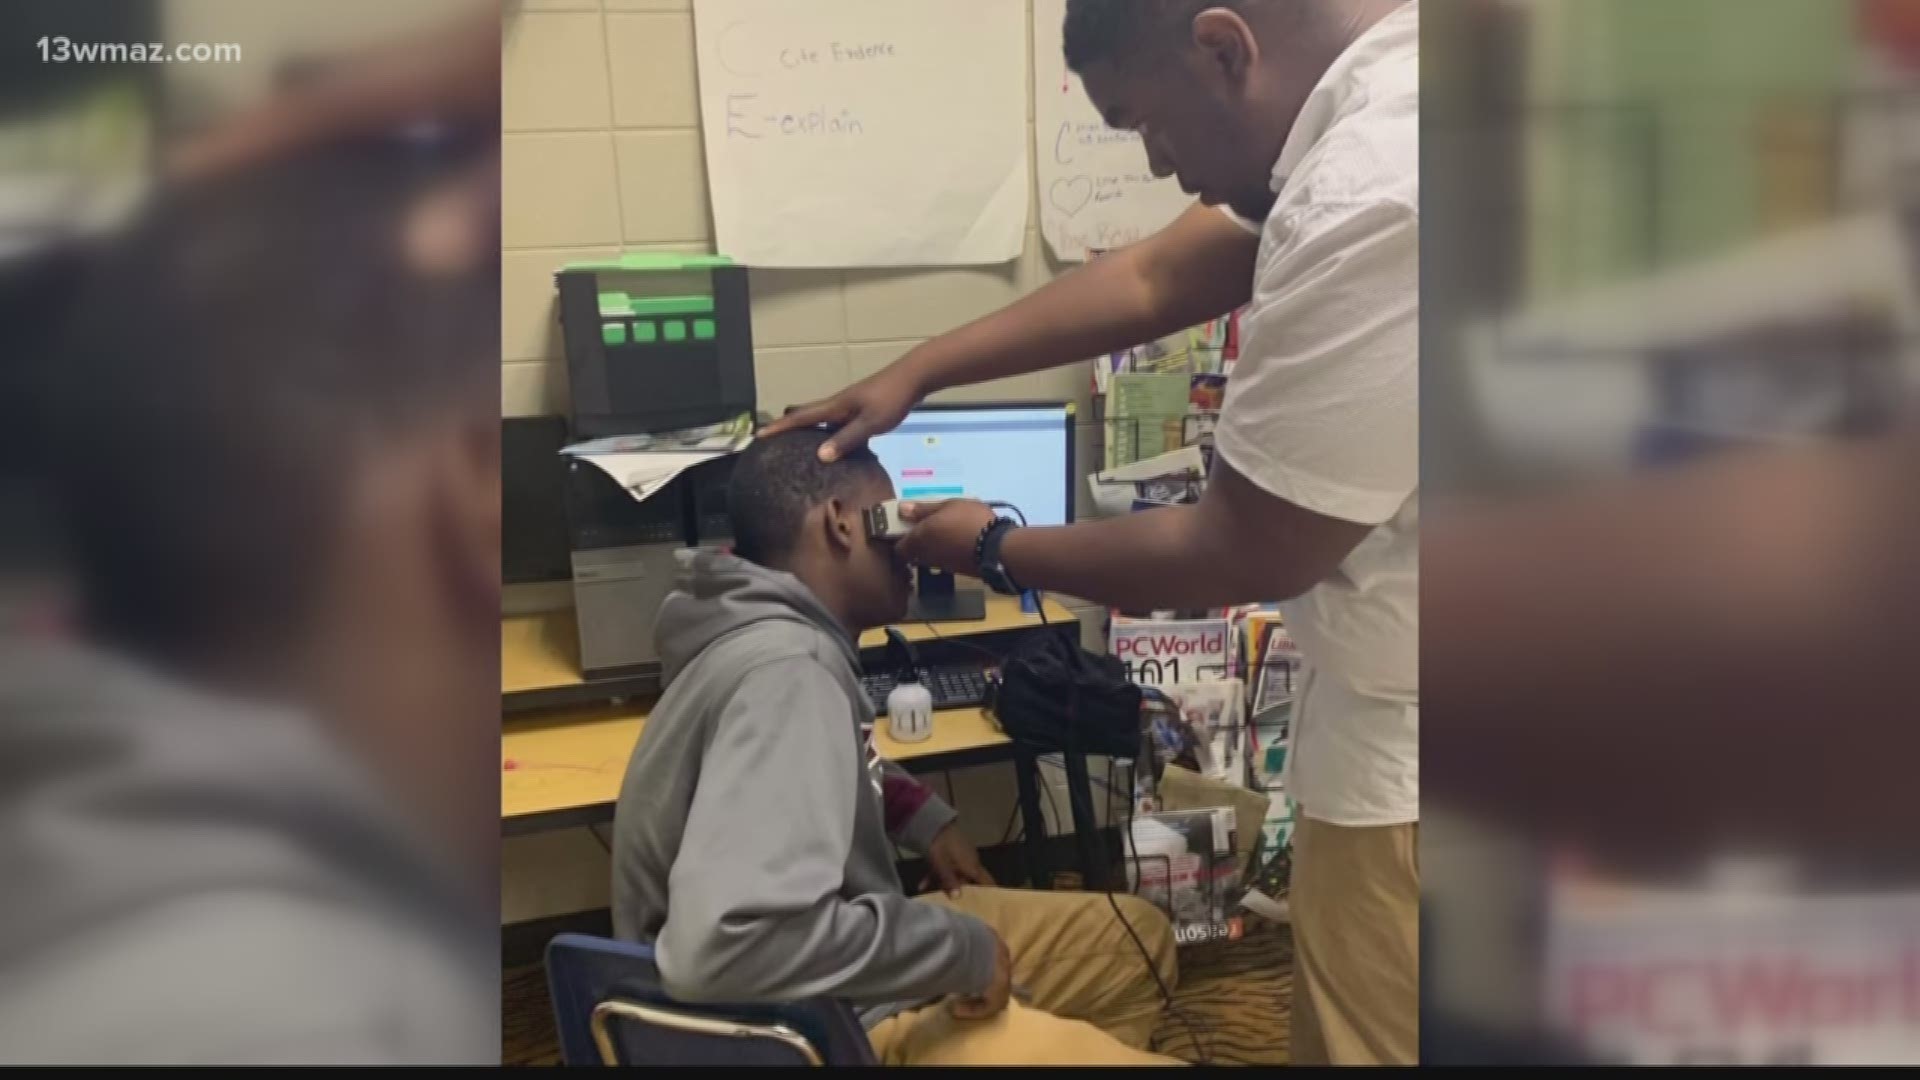 A Bibb County teacher's Facebook post has gone viral, after he posted about giving a student a free haircut. Major Jones, teacher at Ballard-Hudson Middle School, said he noticed the student kept his head down, always wore hoodies, and was getting teased by other kids because of it.